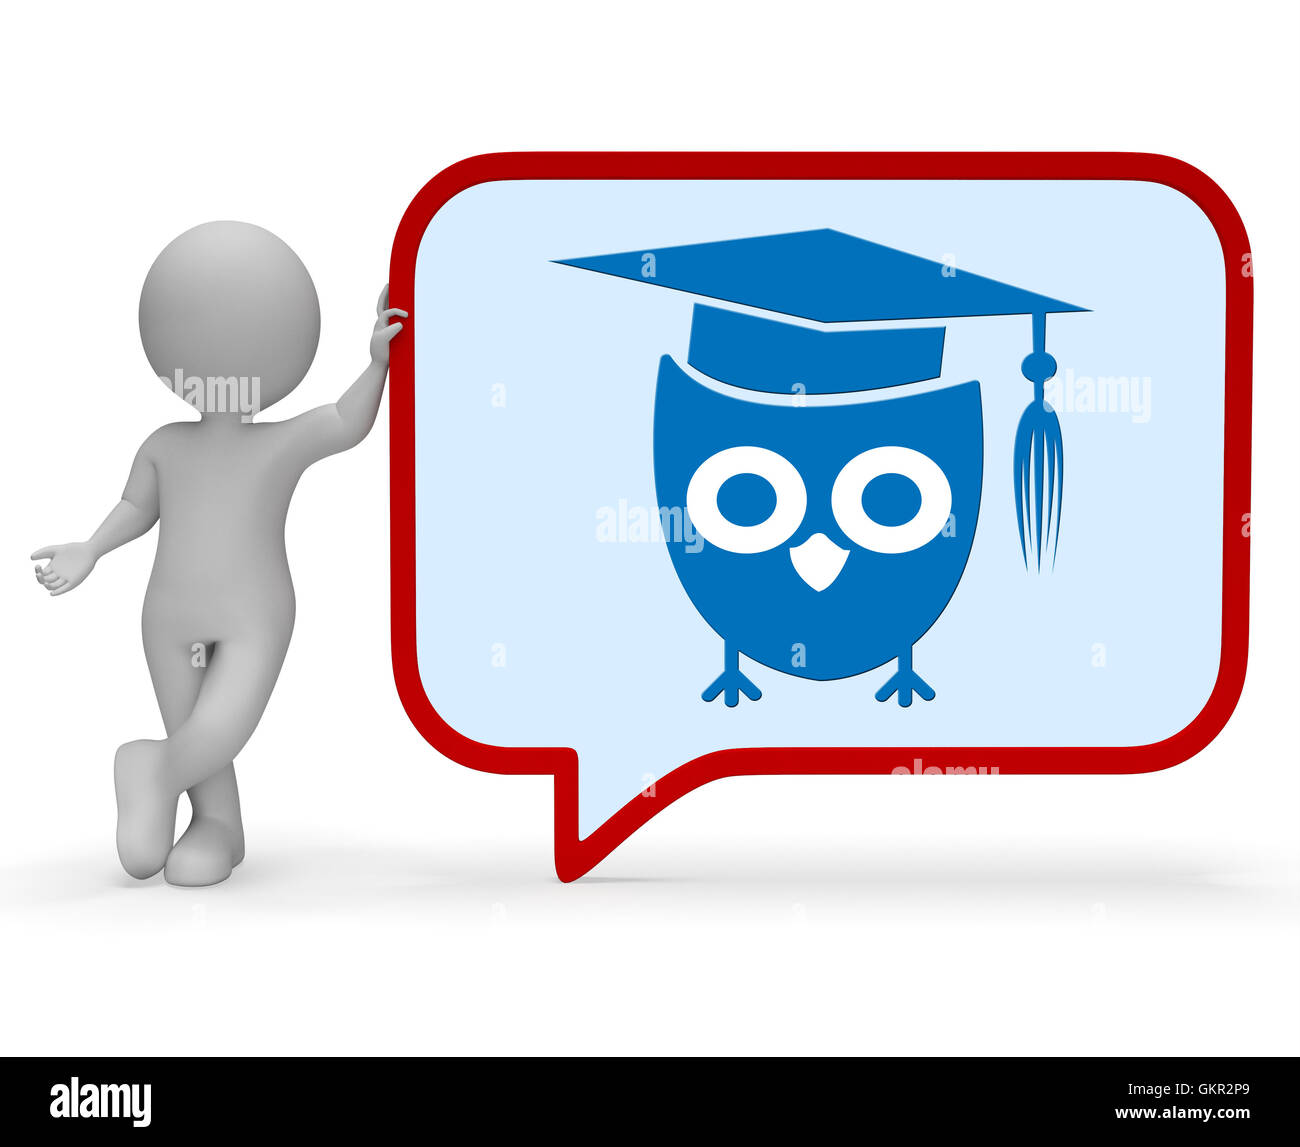 Wise Owl Meaning Smart Wisdom 3d Rendering Stock Photo